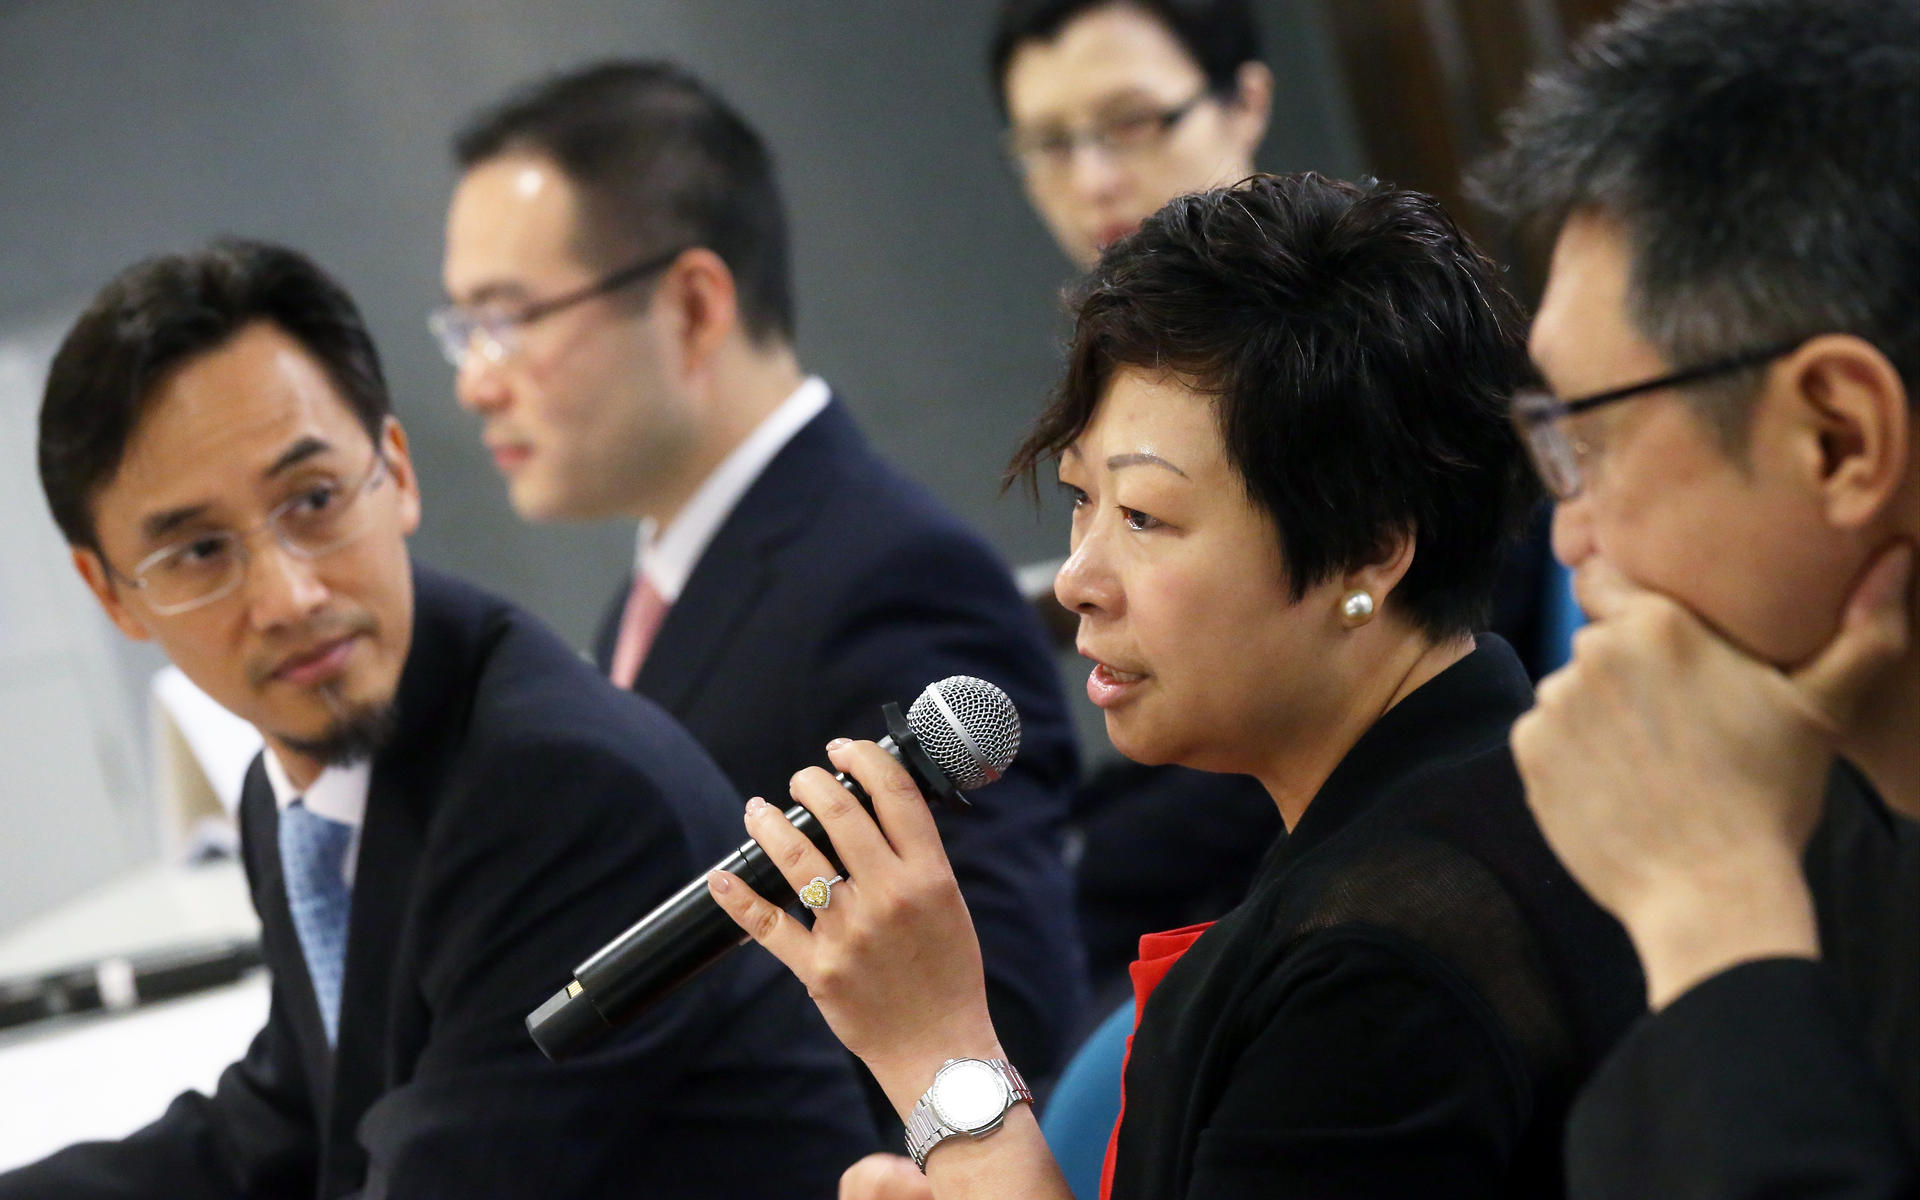 BEA Union Investment Management's Eleanor Wan plans to initially launch no more than three funds under the scheme. Photo: K.Y. Cheng